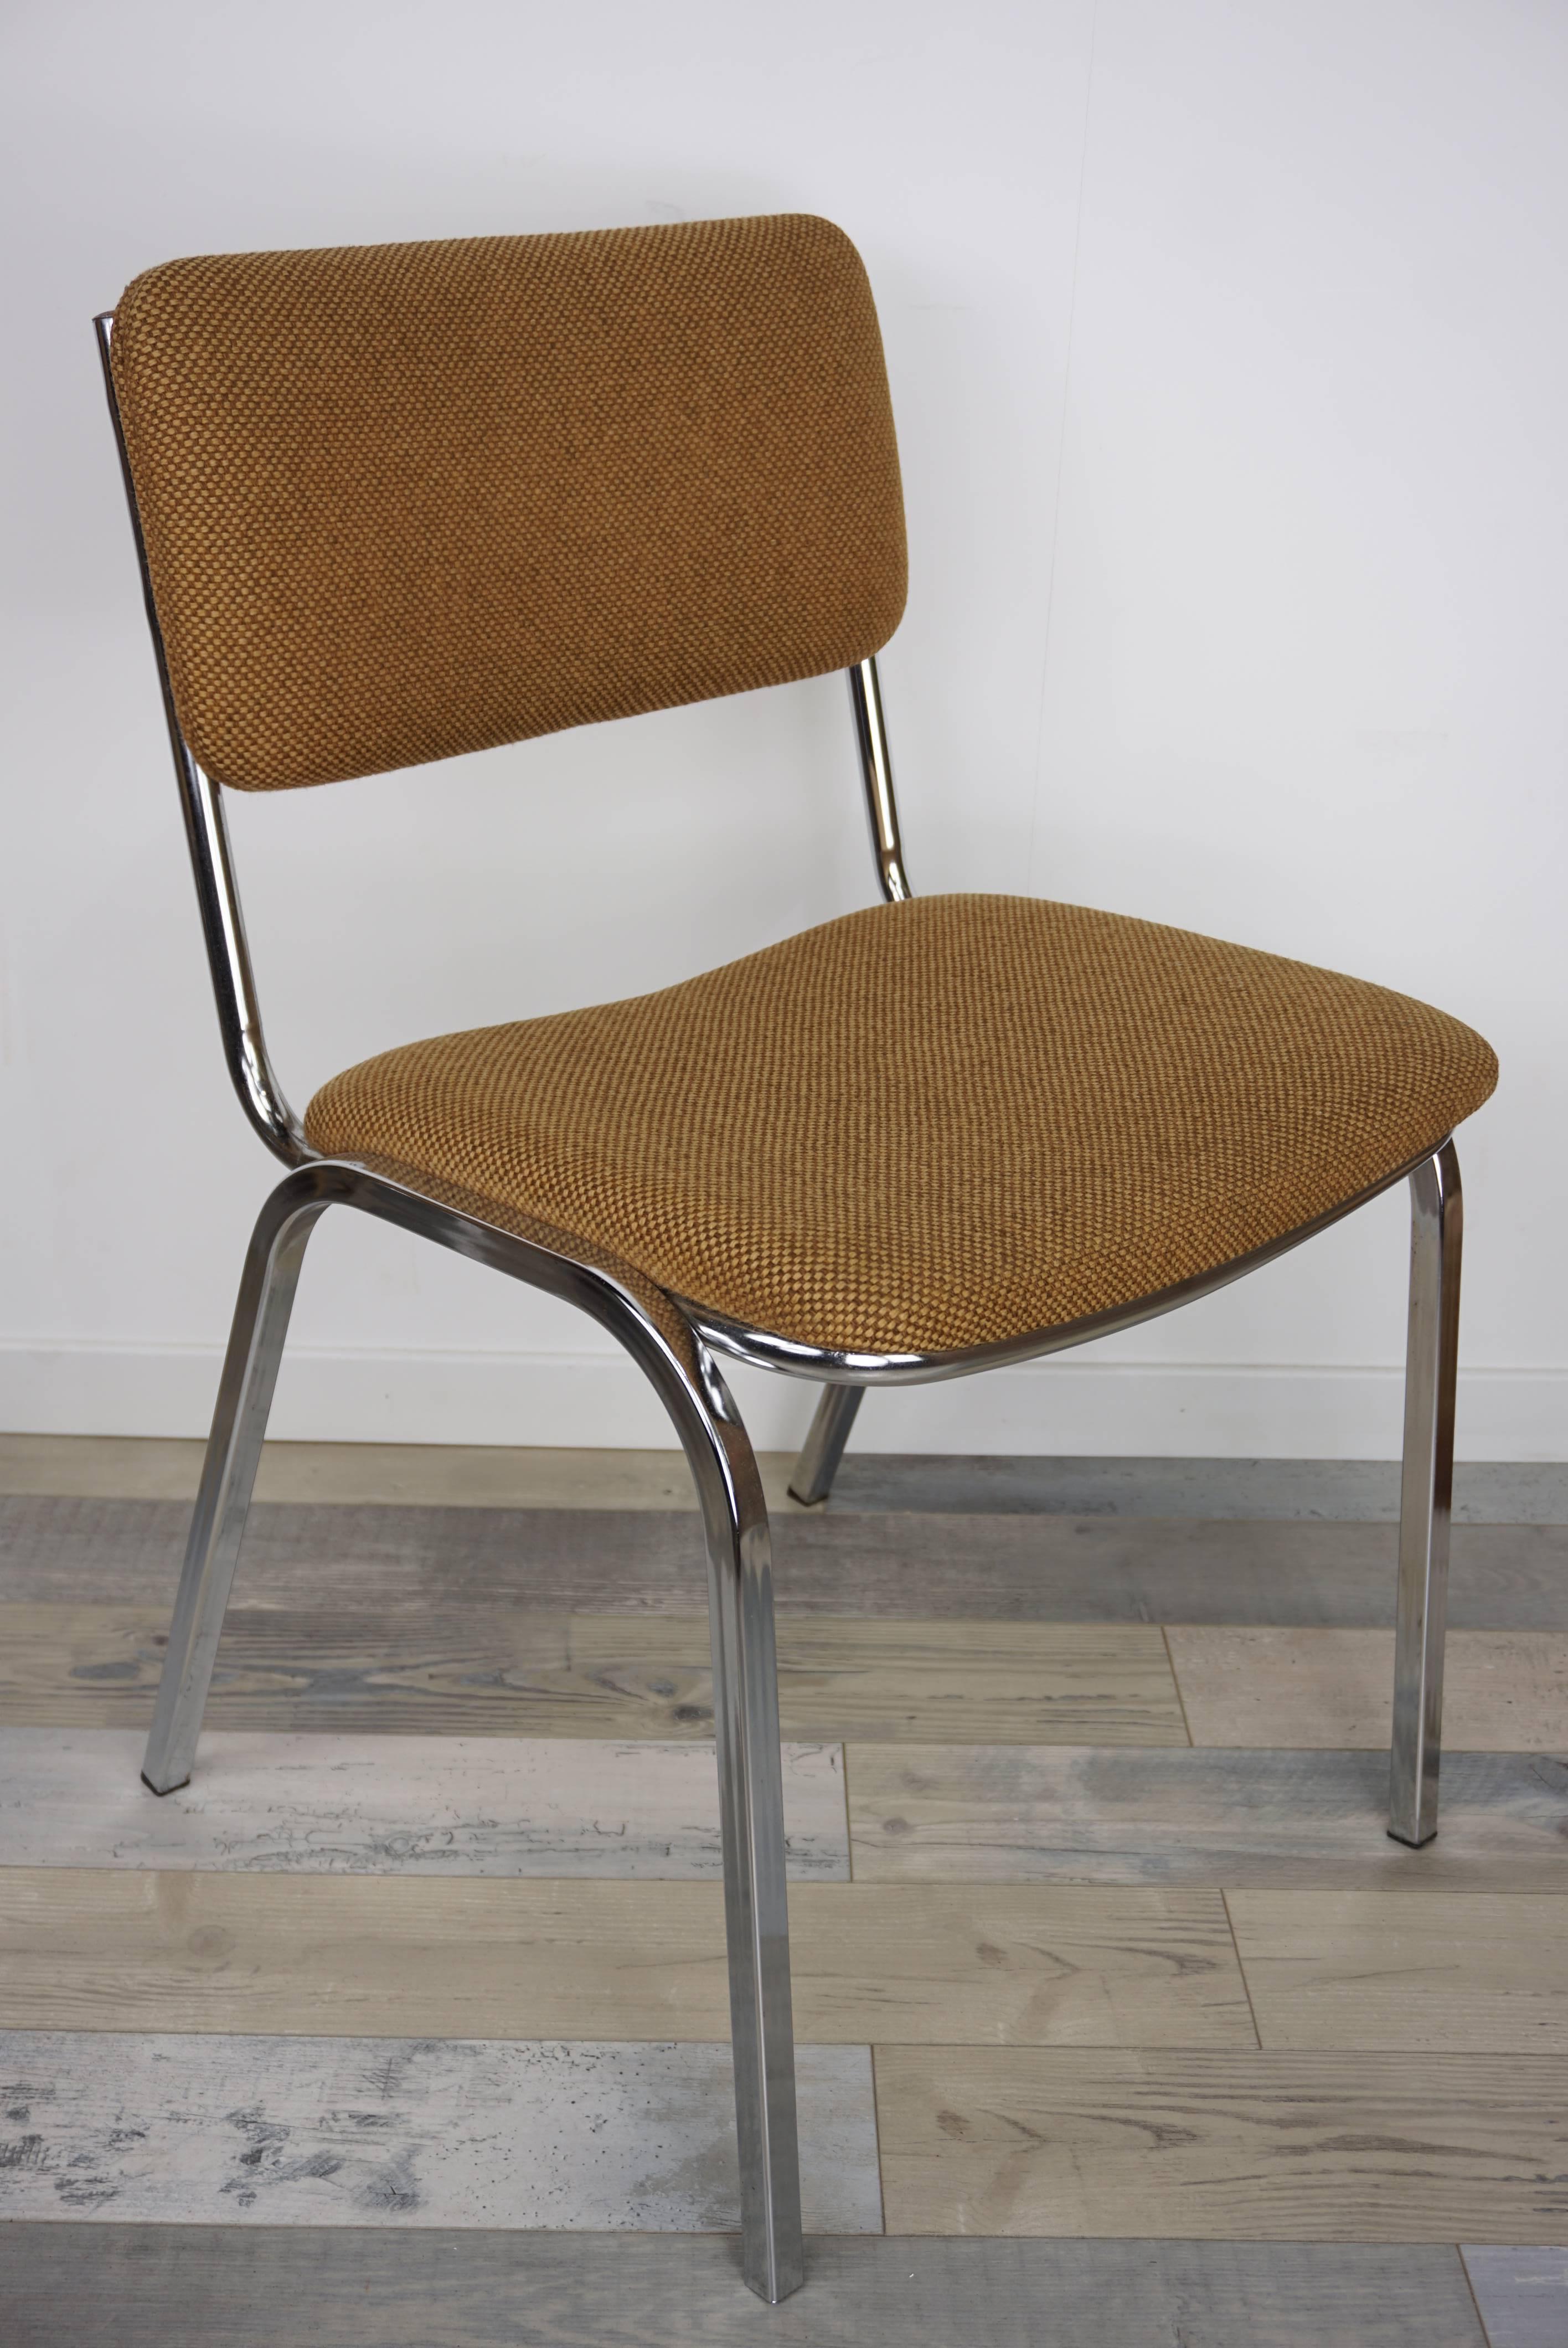 Chromed structure and tweed back and seat for this set of six French design chairs from the 1960s.